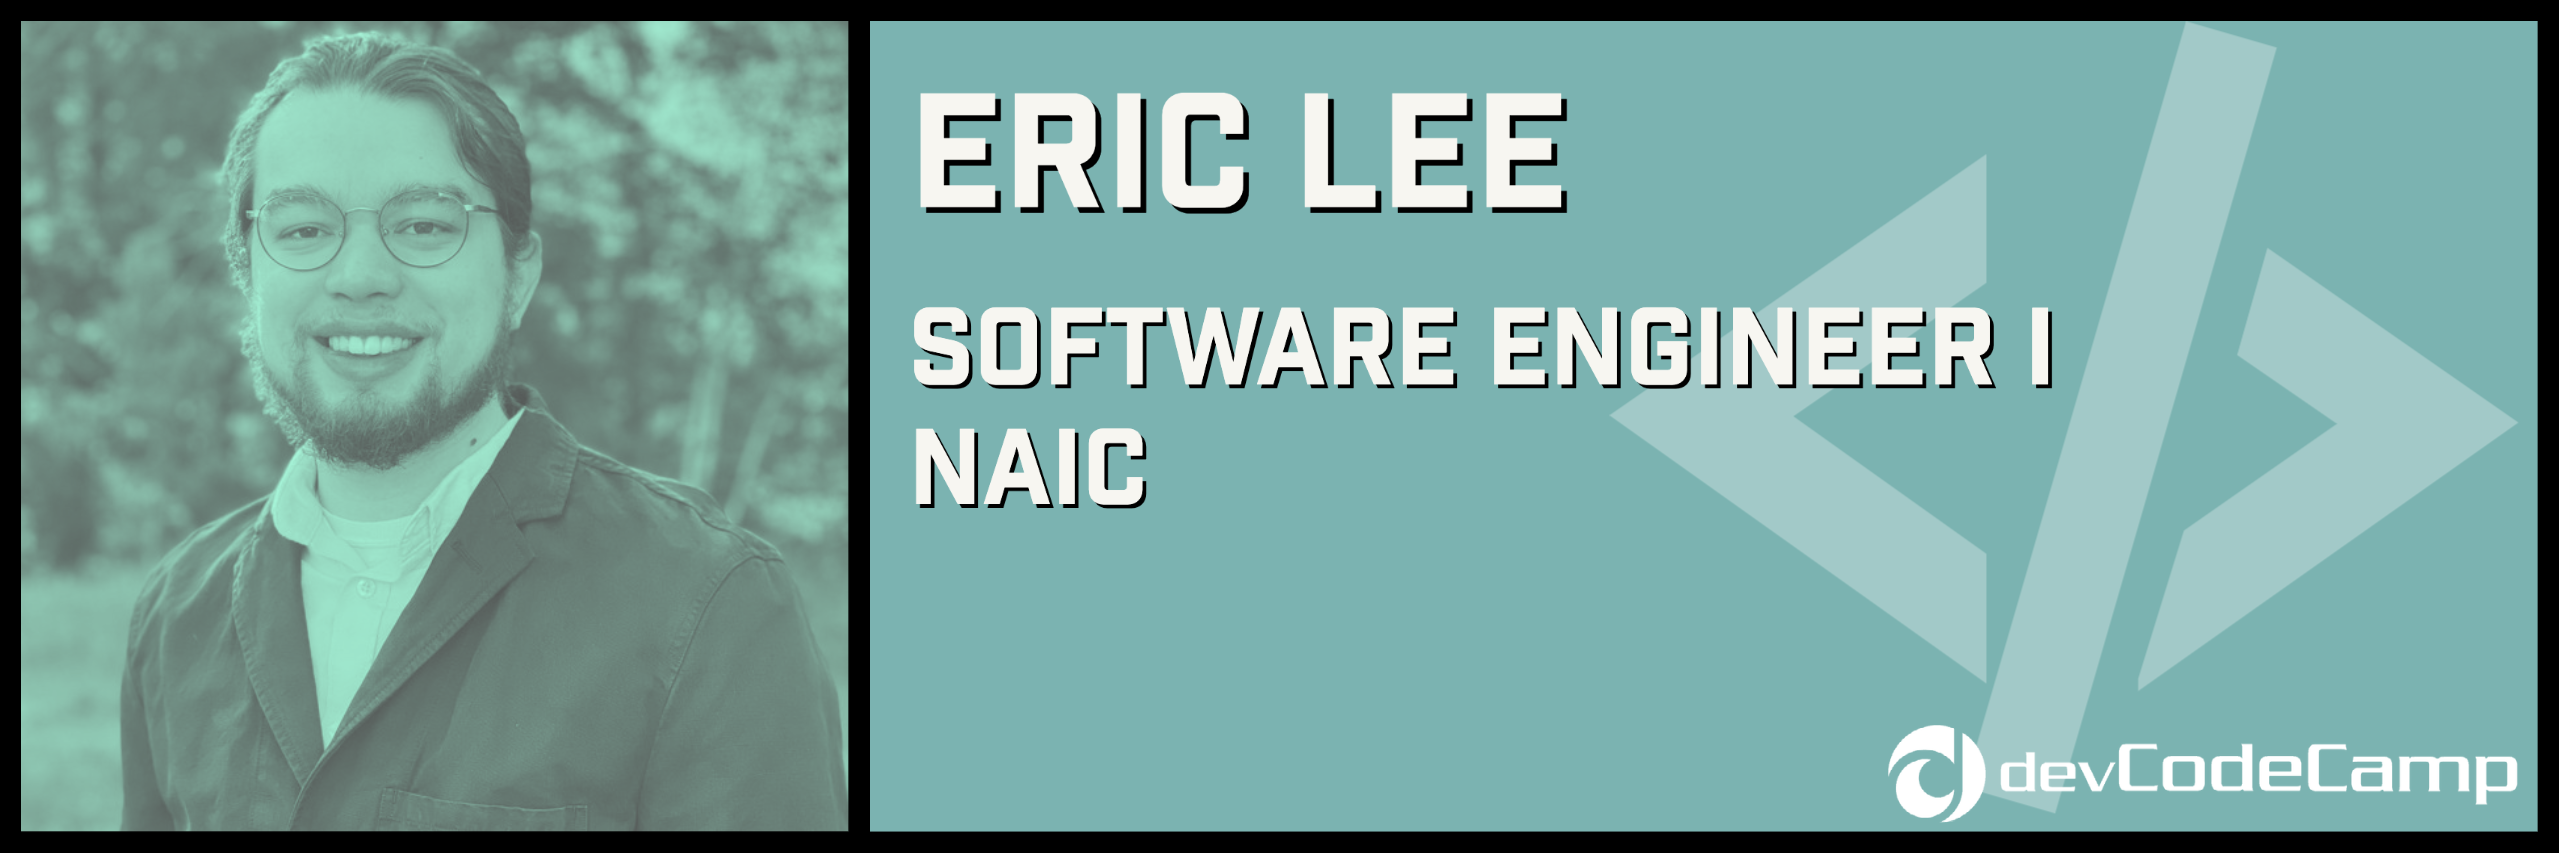 Eric Lee graduates from devCodeCamp's remote coding bootcamp and becomes a Software Engineer